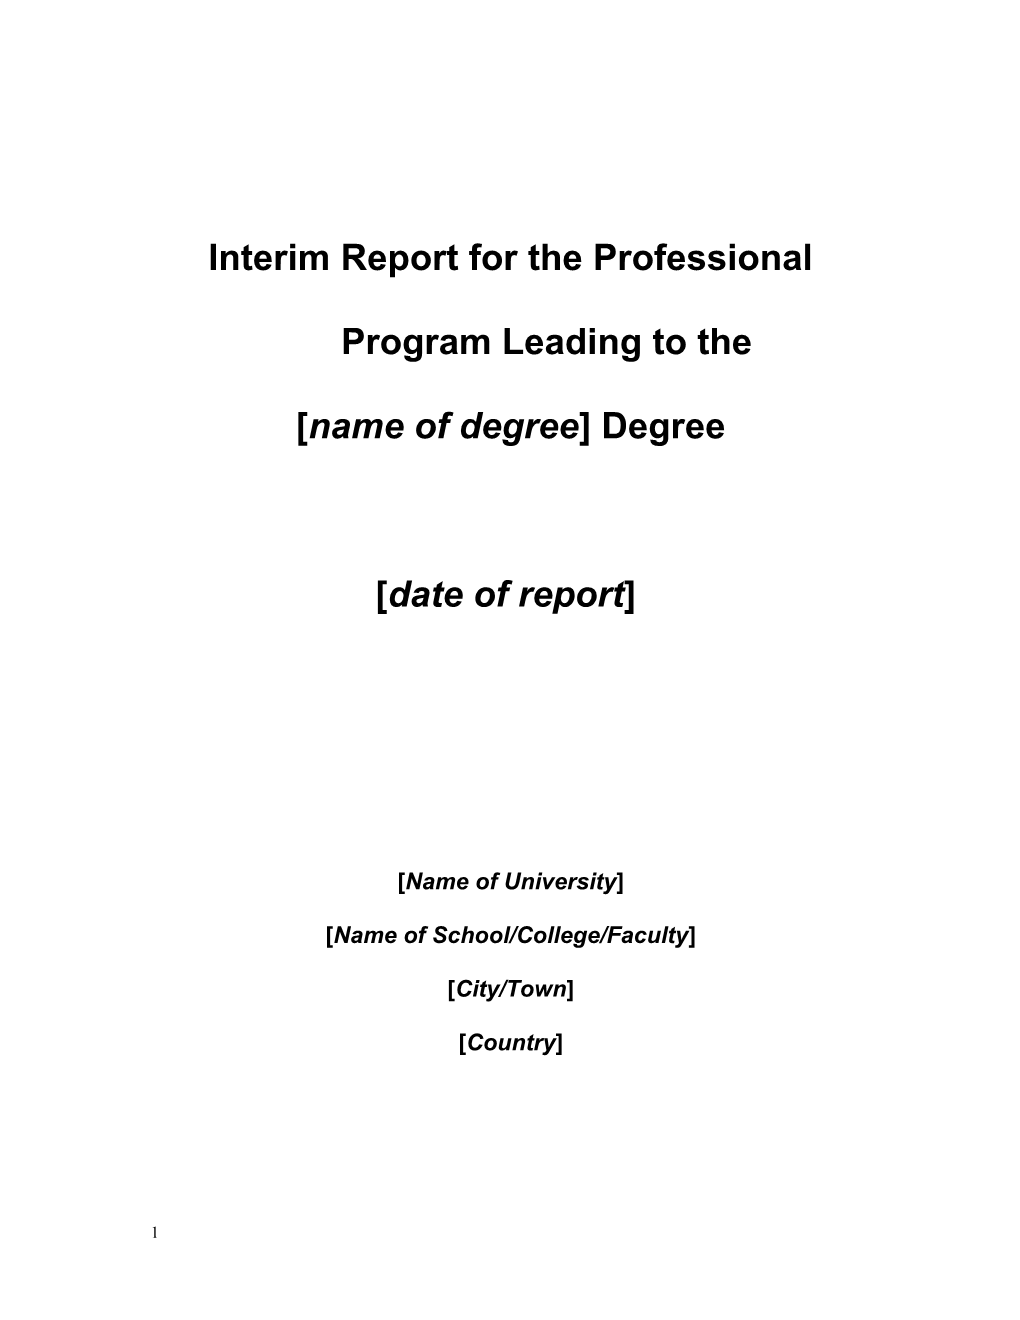 Interim Report for the Professional Program Leading to The